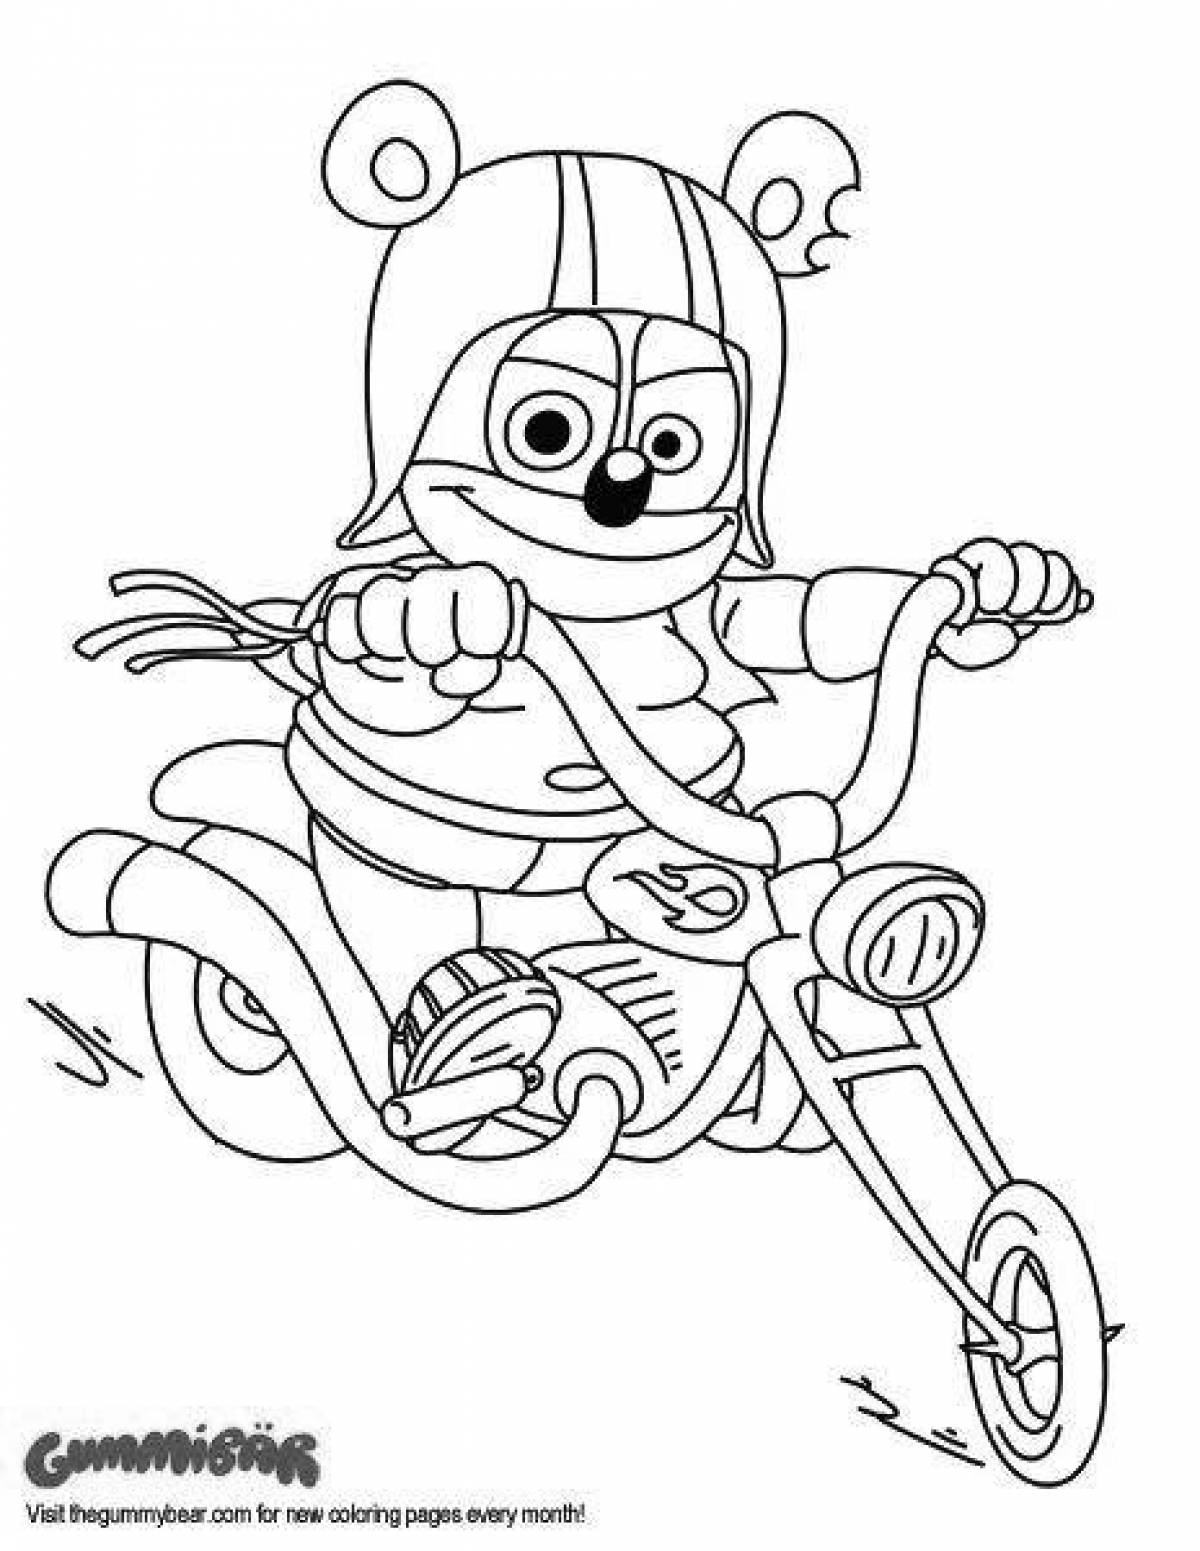 Humber fluffy bear coloring page